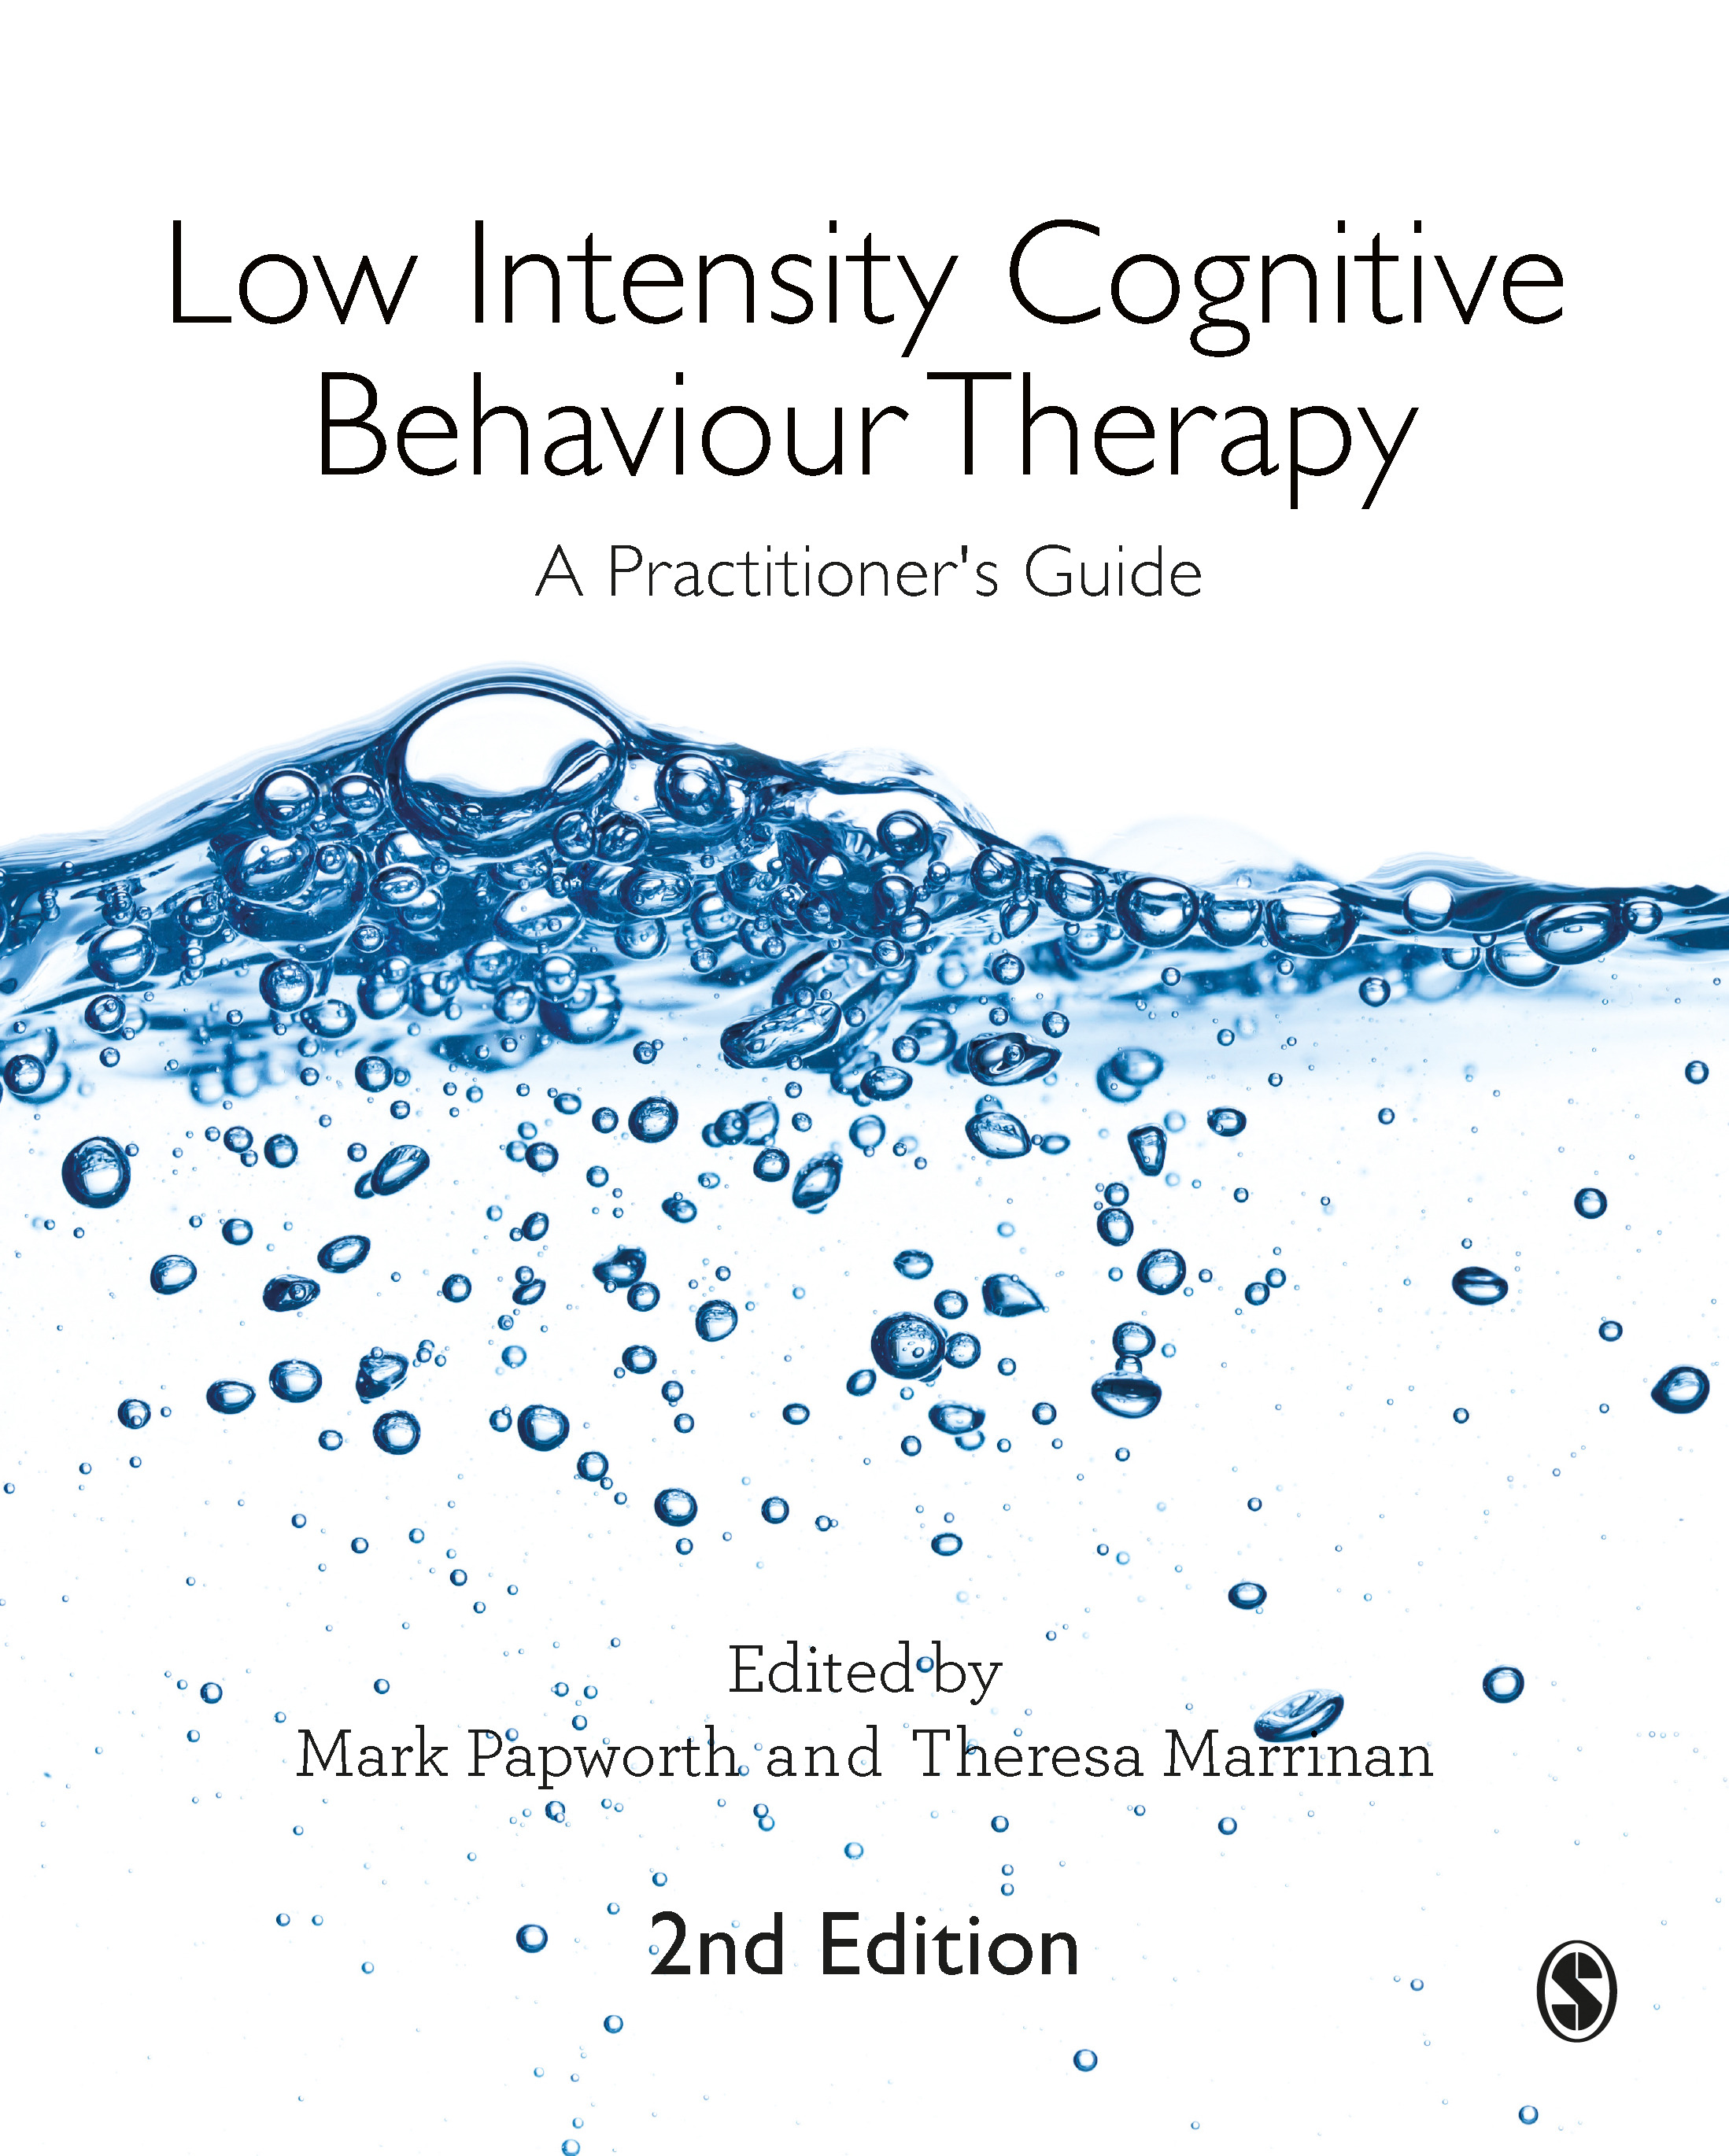  Low Intensity Cognitive Behaviour Therapy: A Practitioner’s Guide